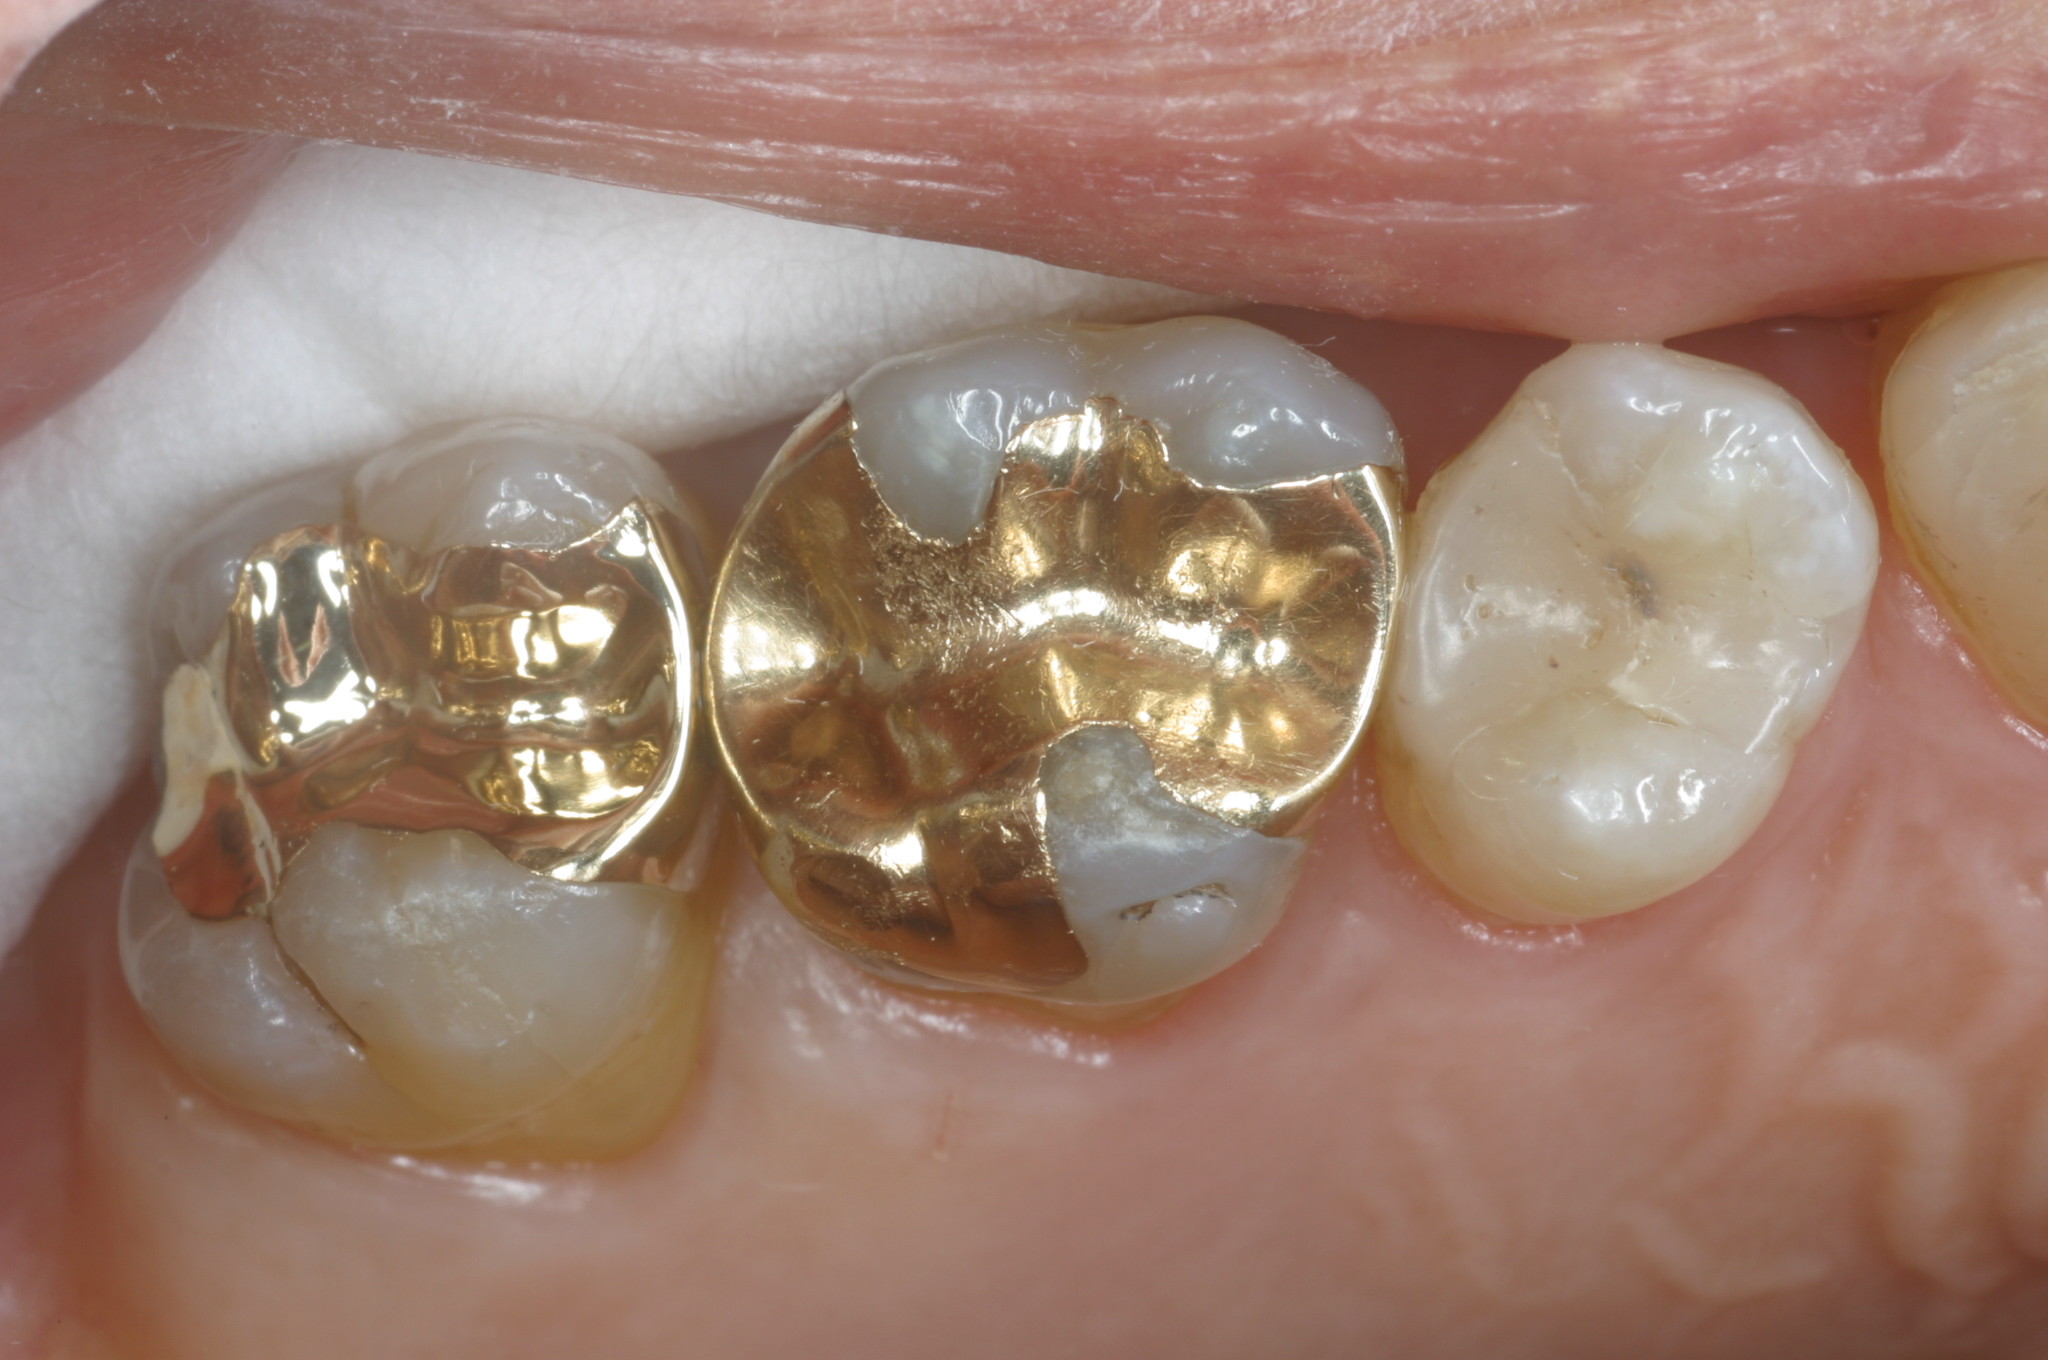 Gold inlays are a good treatment option for posterior teeth